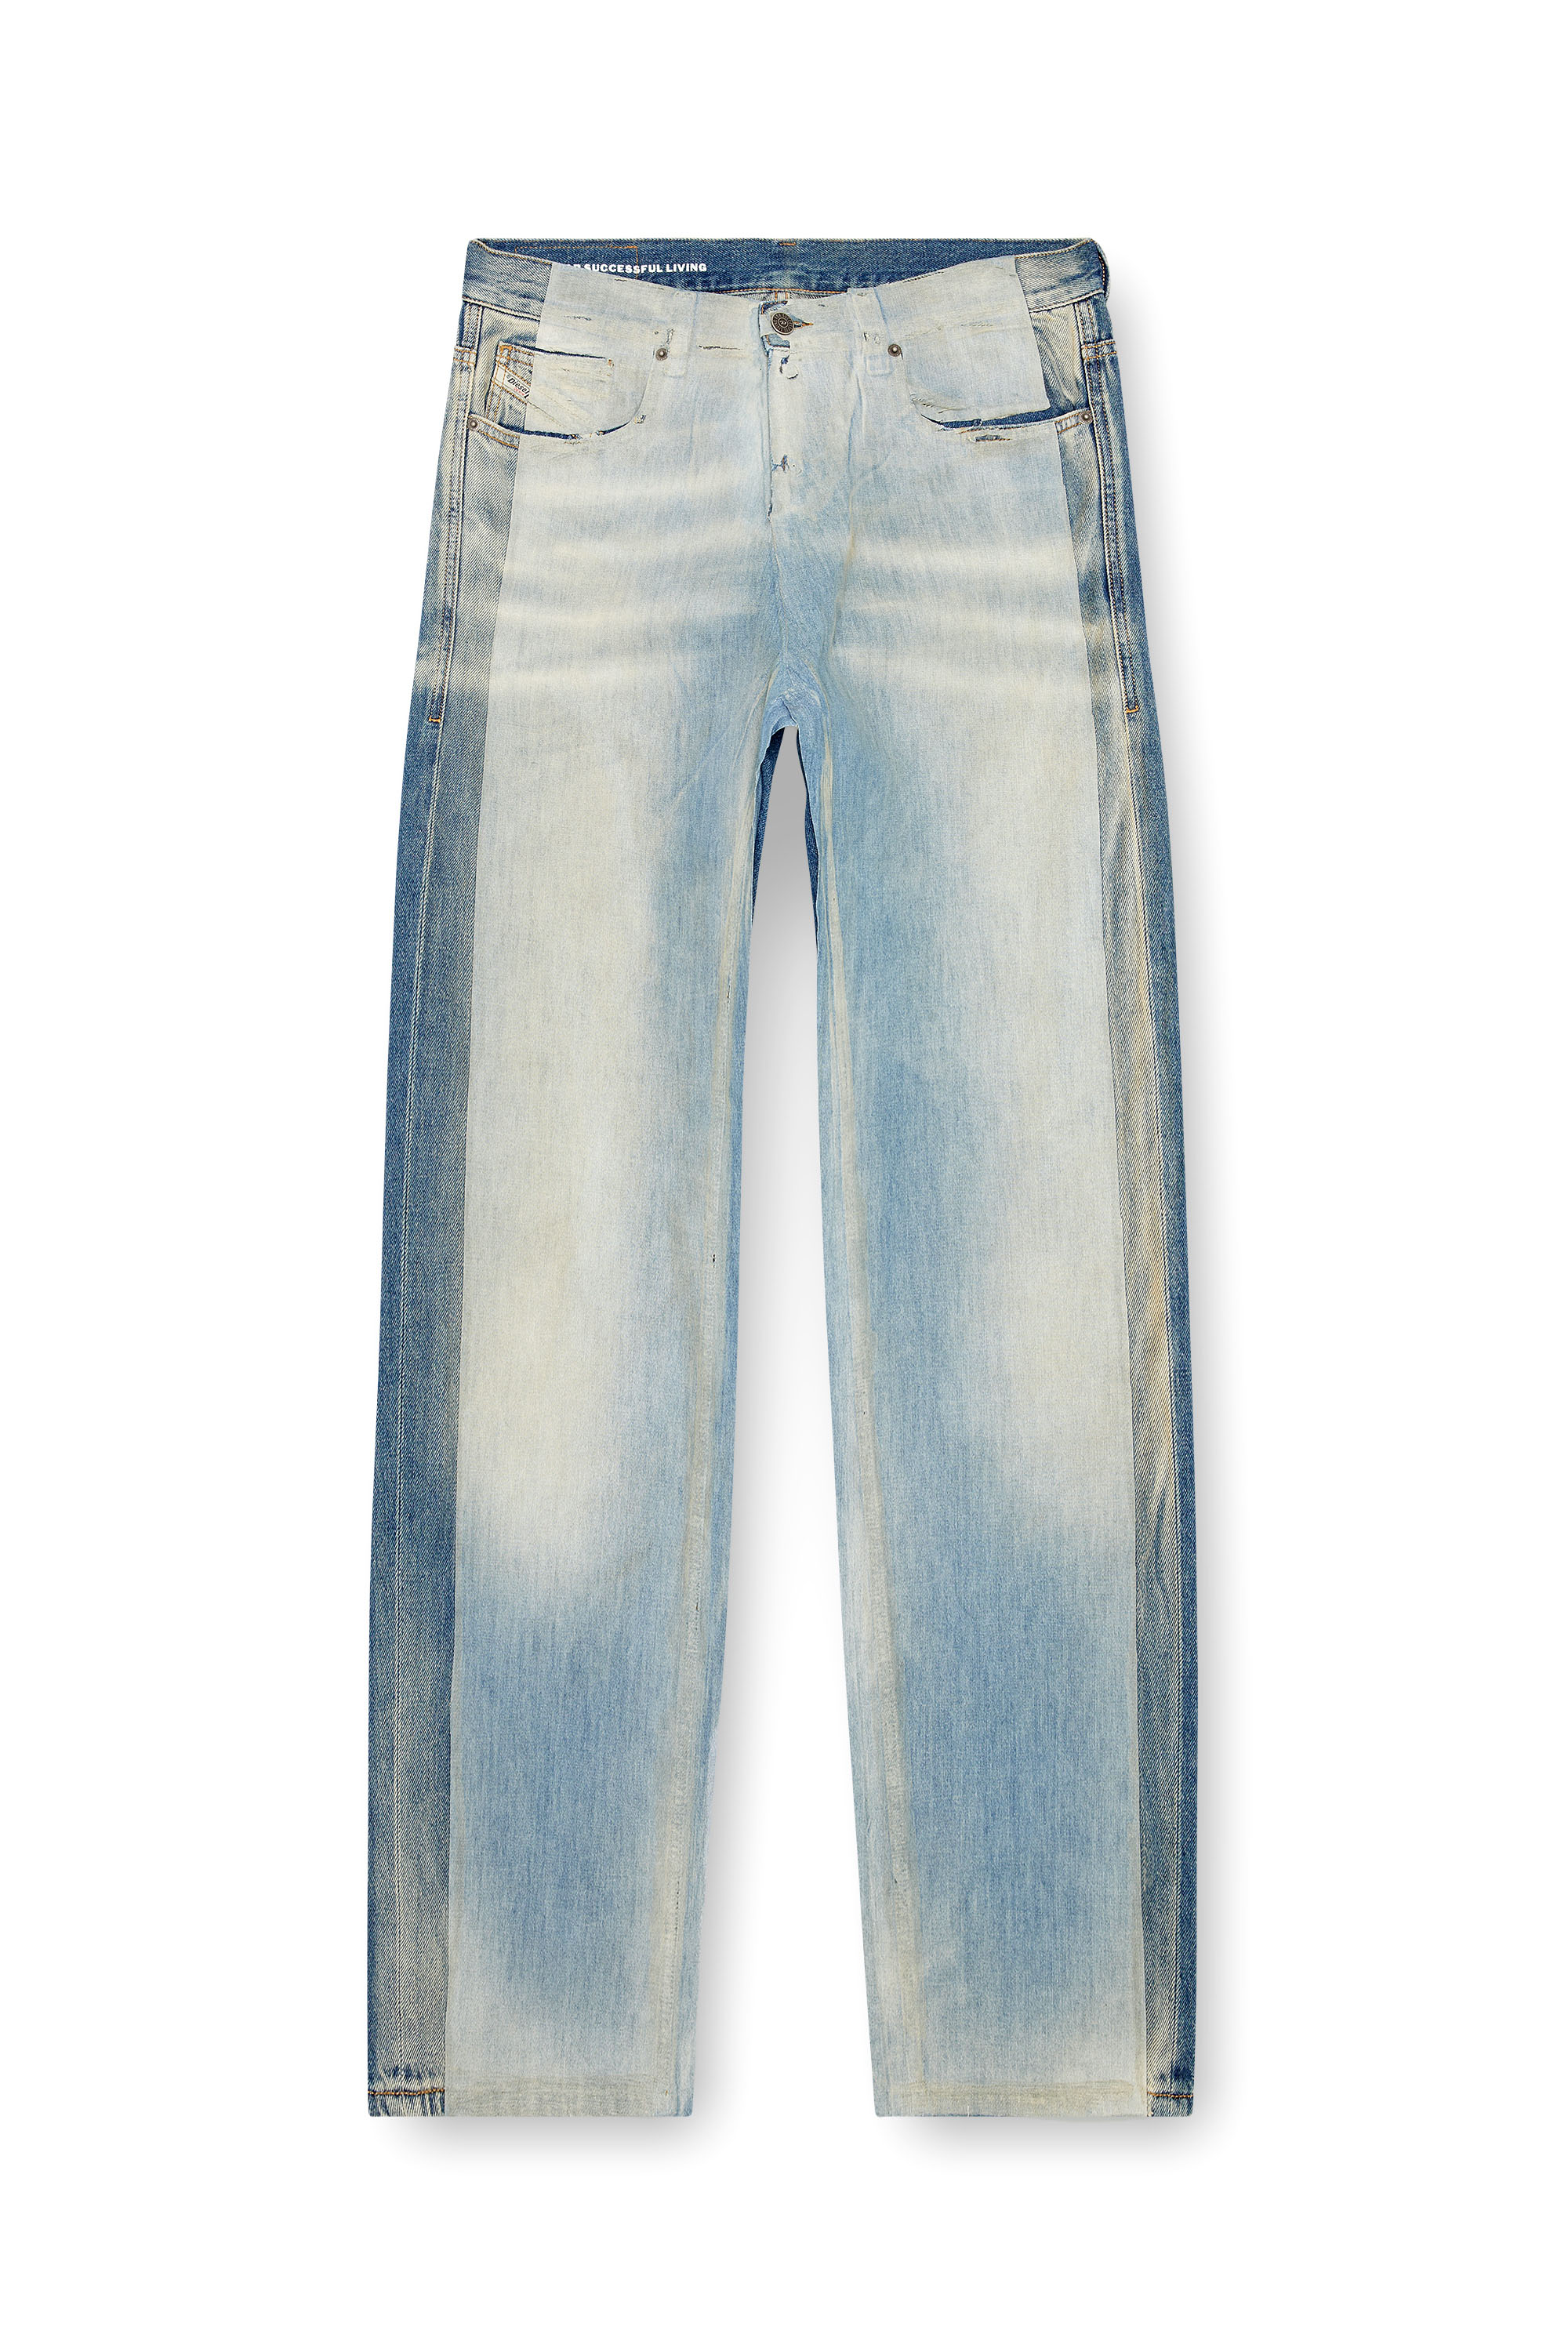 Diesel - Straight Jeans 2010 D-Macs 09K22, Hombre Straight Jeans - 2010 D-Macs in Azul marino - Image 3